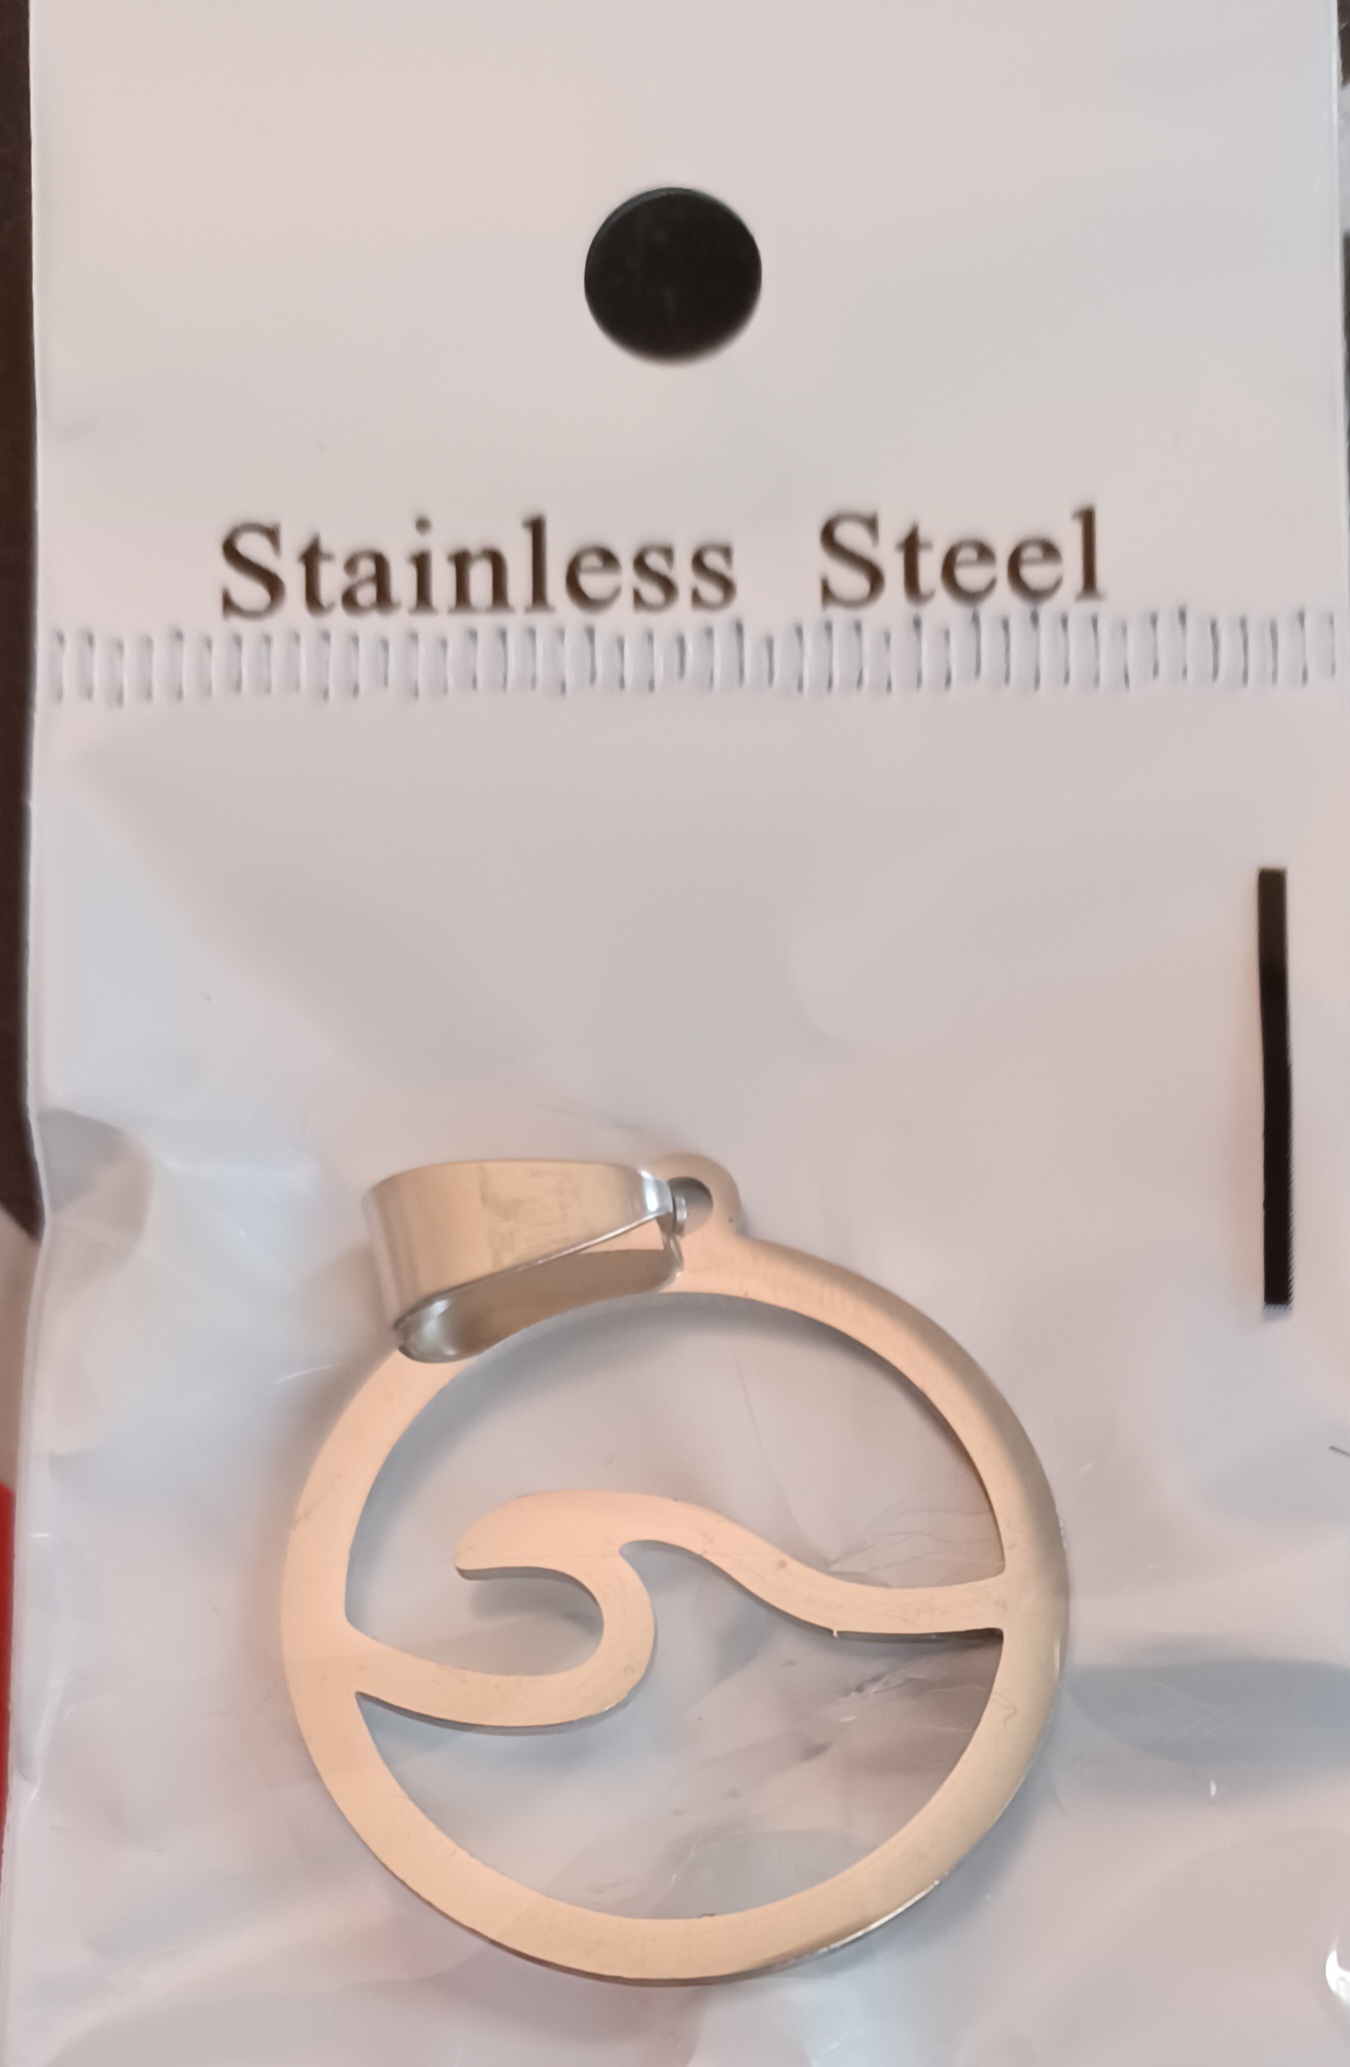 25mm Stainless Steel Pendant - Wave (each)